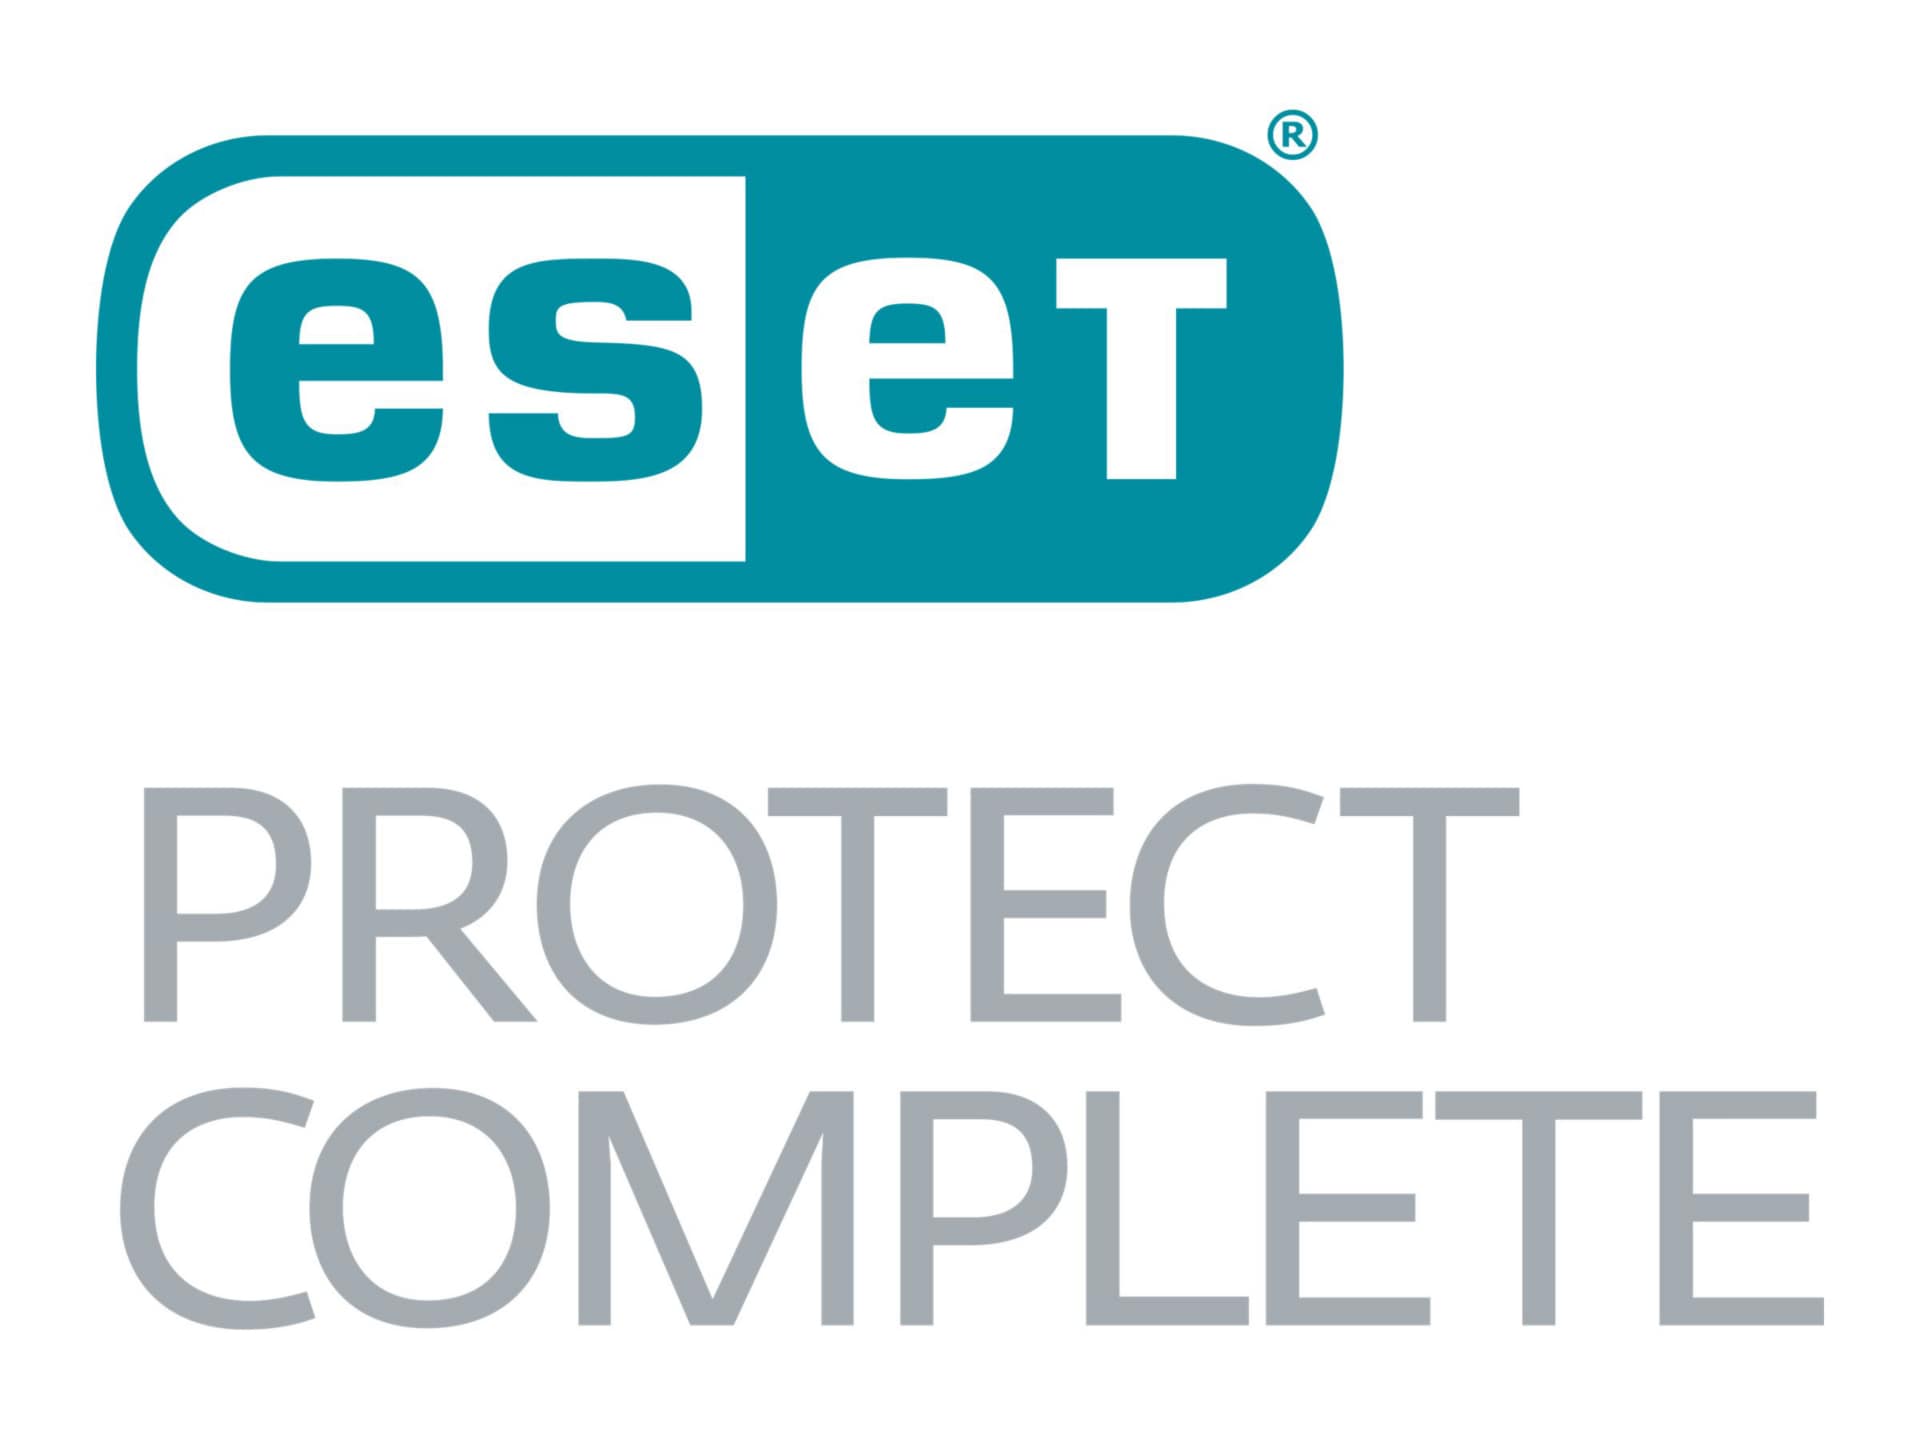 ESET PROTECT Complete - subscription license extension (3 years) - 1 seat